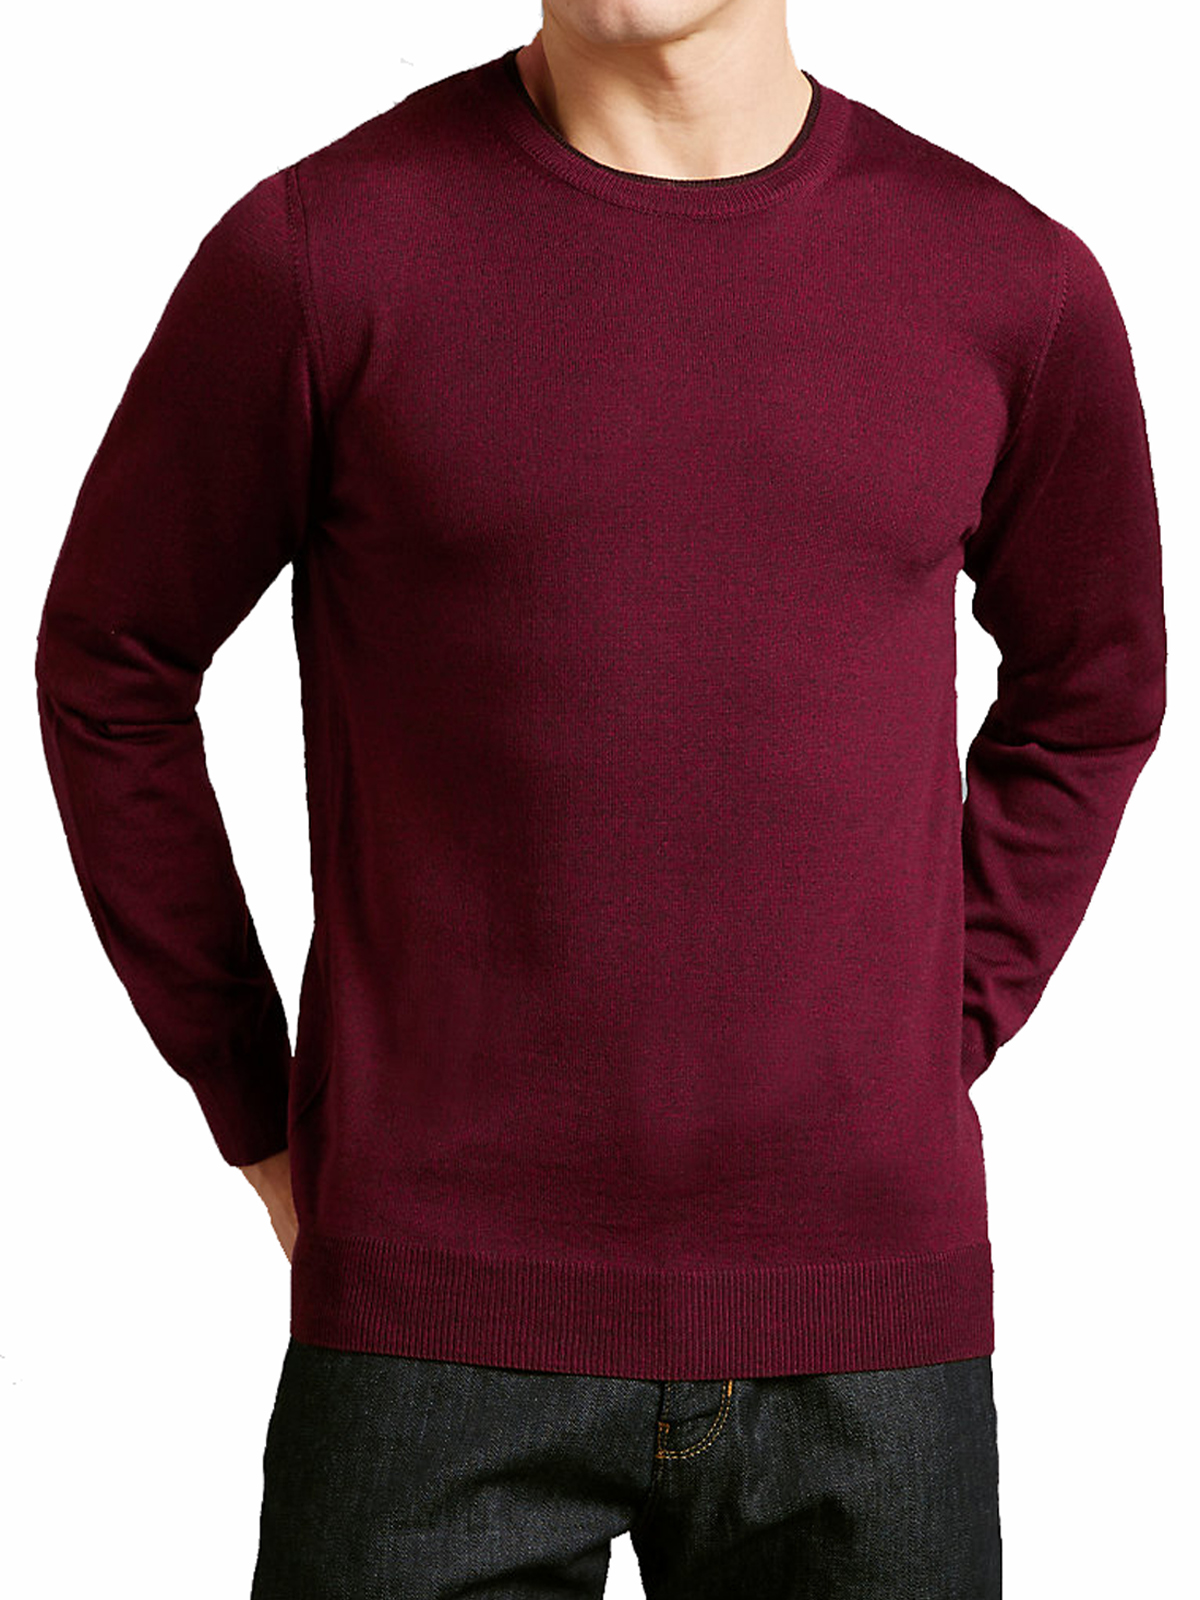 Marks and Spencer - - M&5 RED Pure Merino Wool Crew Neck Jumper - Size ...